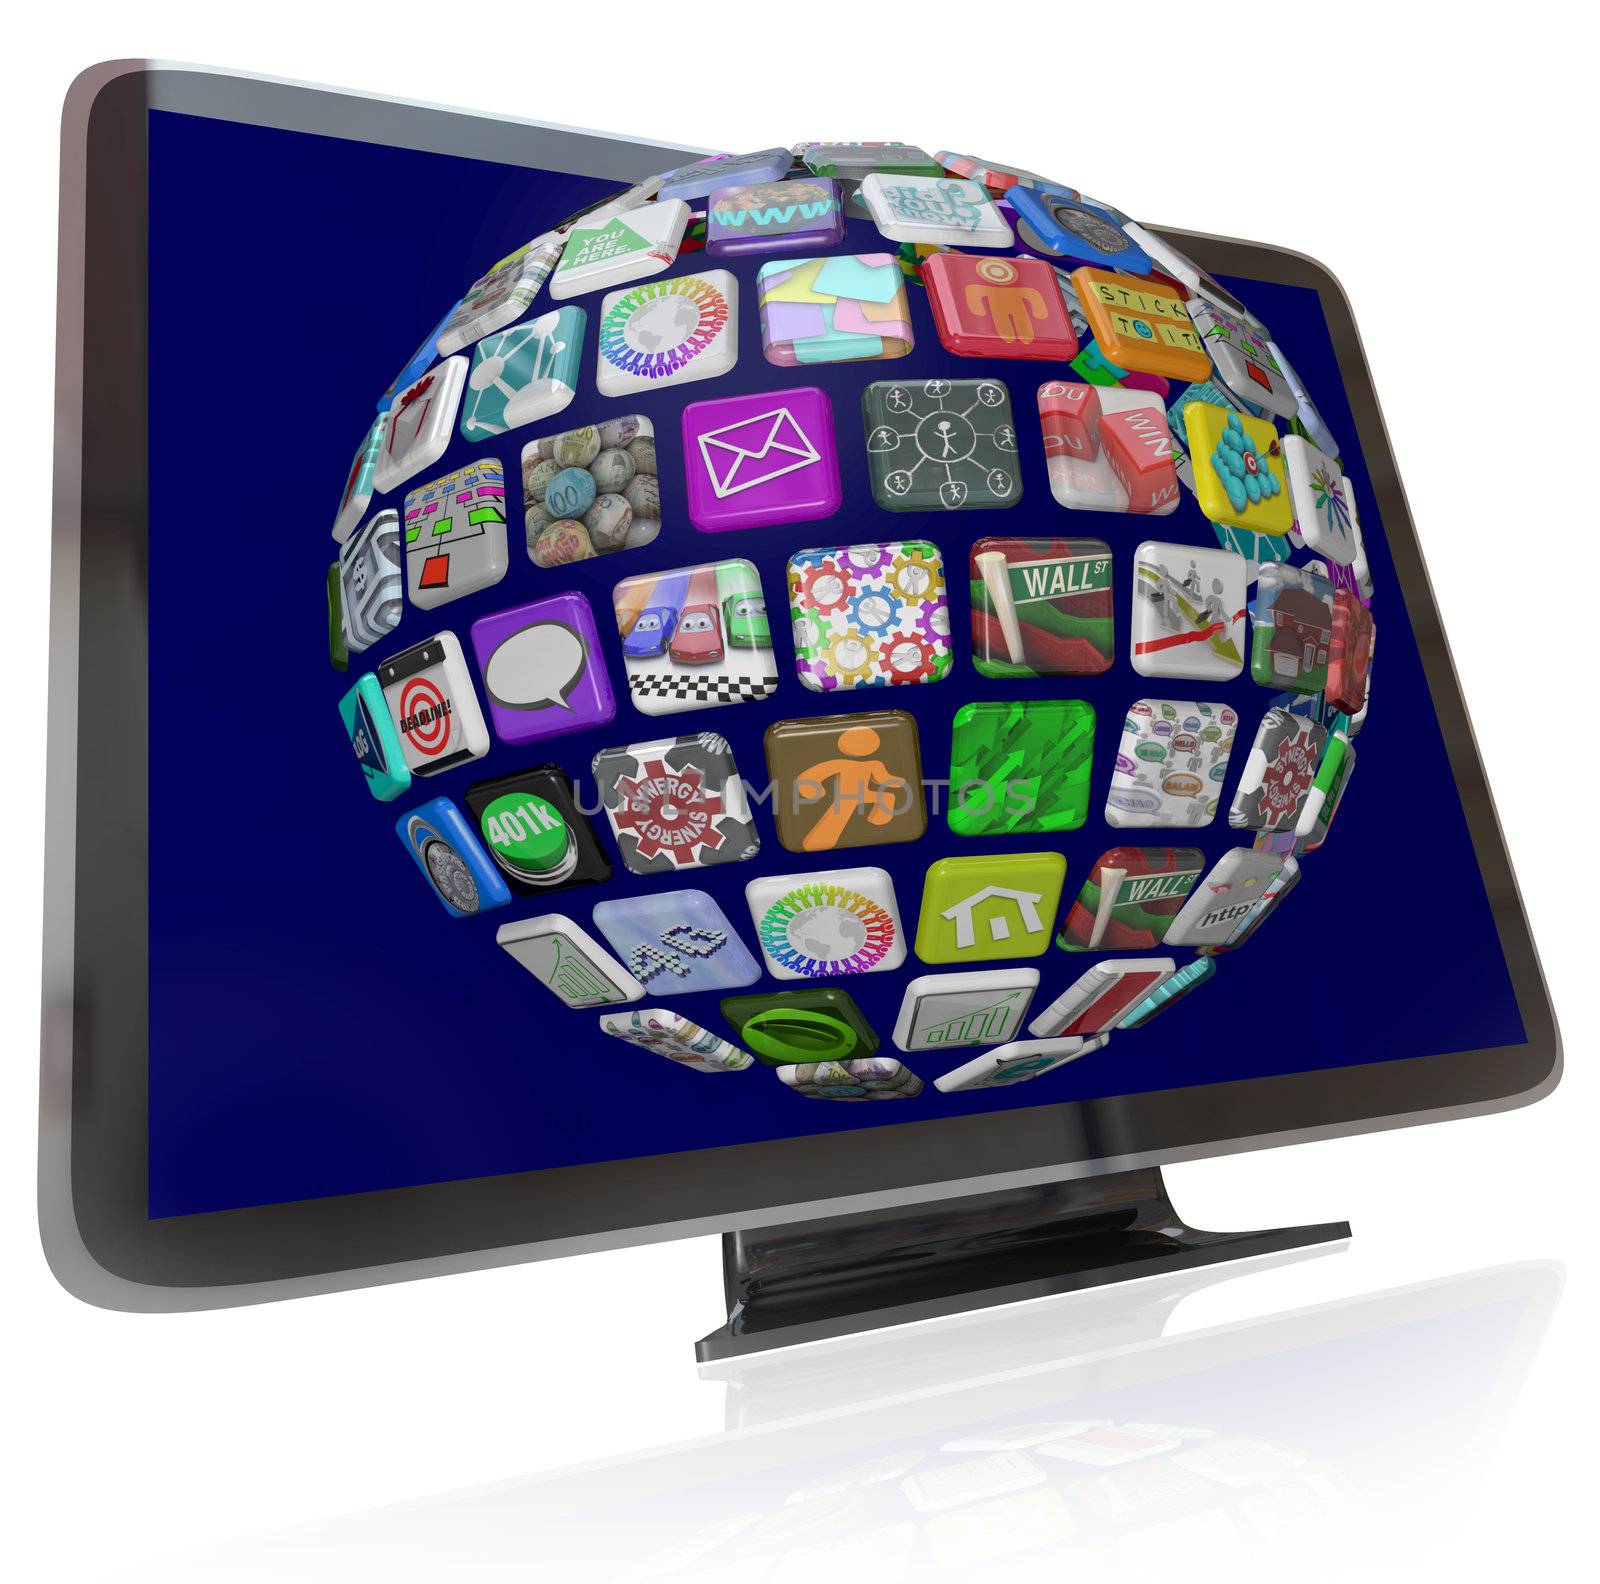 A HDTV television with a sphere of streaming content icons on its screen representing the wide variety of entertainment and information choices available to you